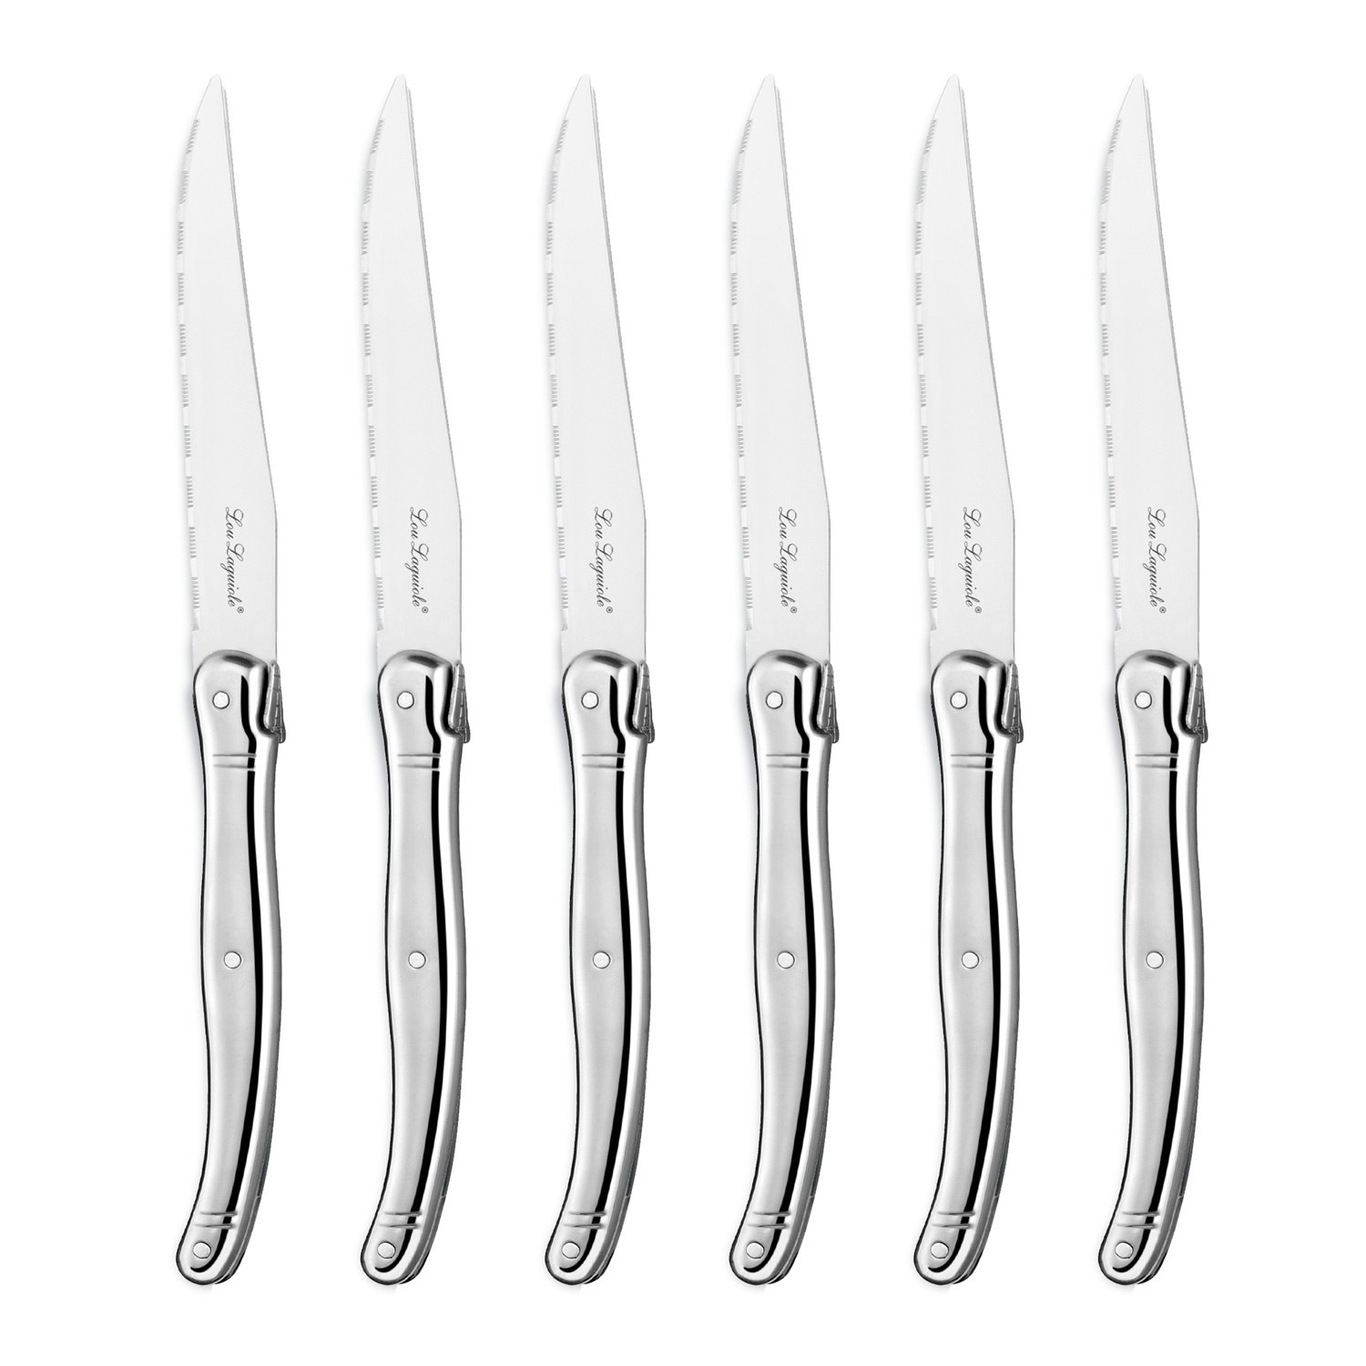 https://royaldesign.com/image/2/lou-laguiole-tradition-grill-knives-with-knife-block-6-pack-6?w=800&quality=80